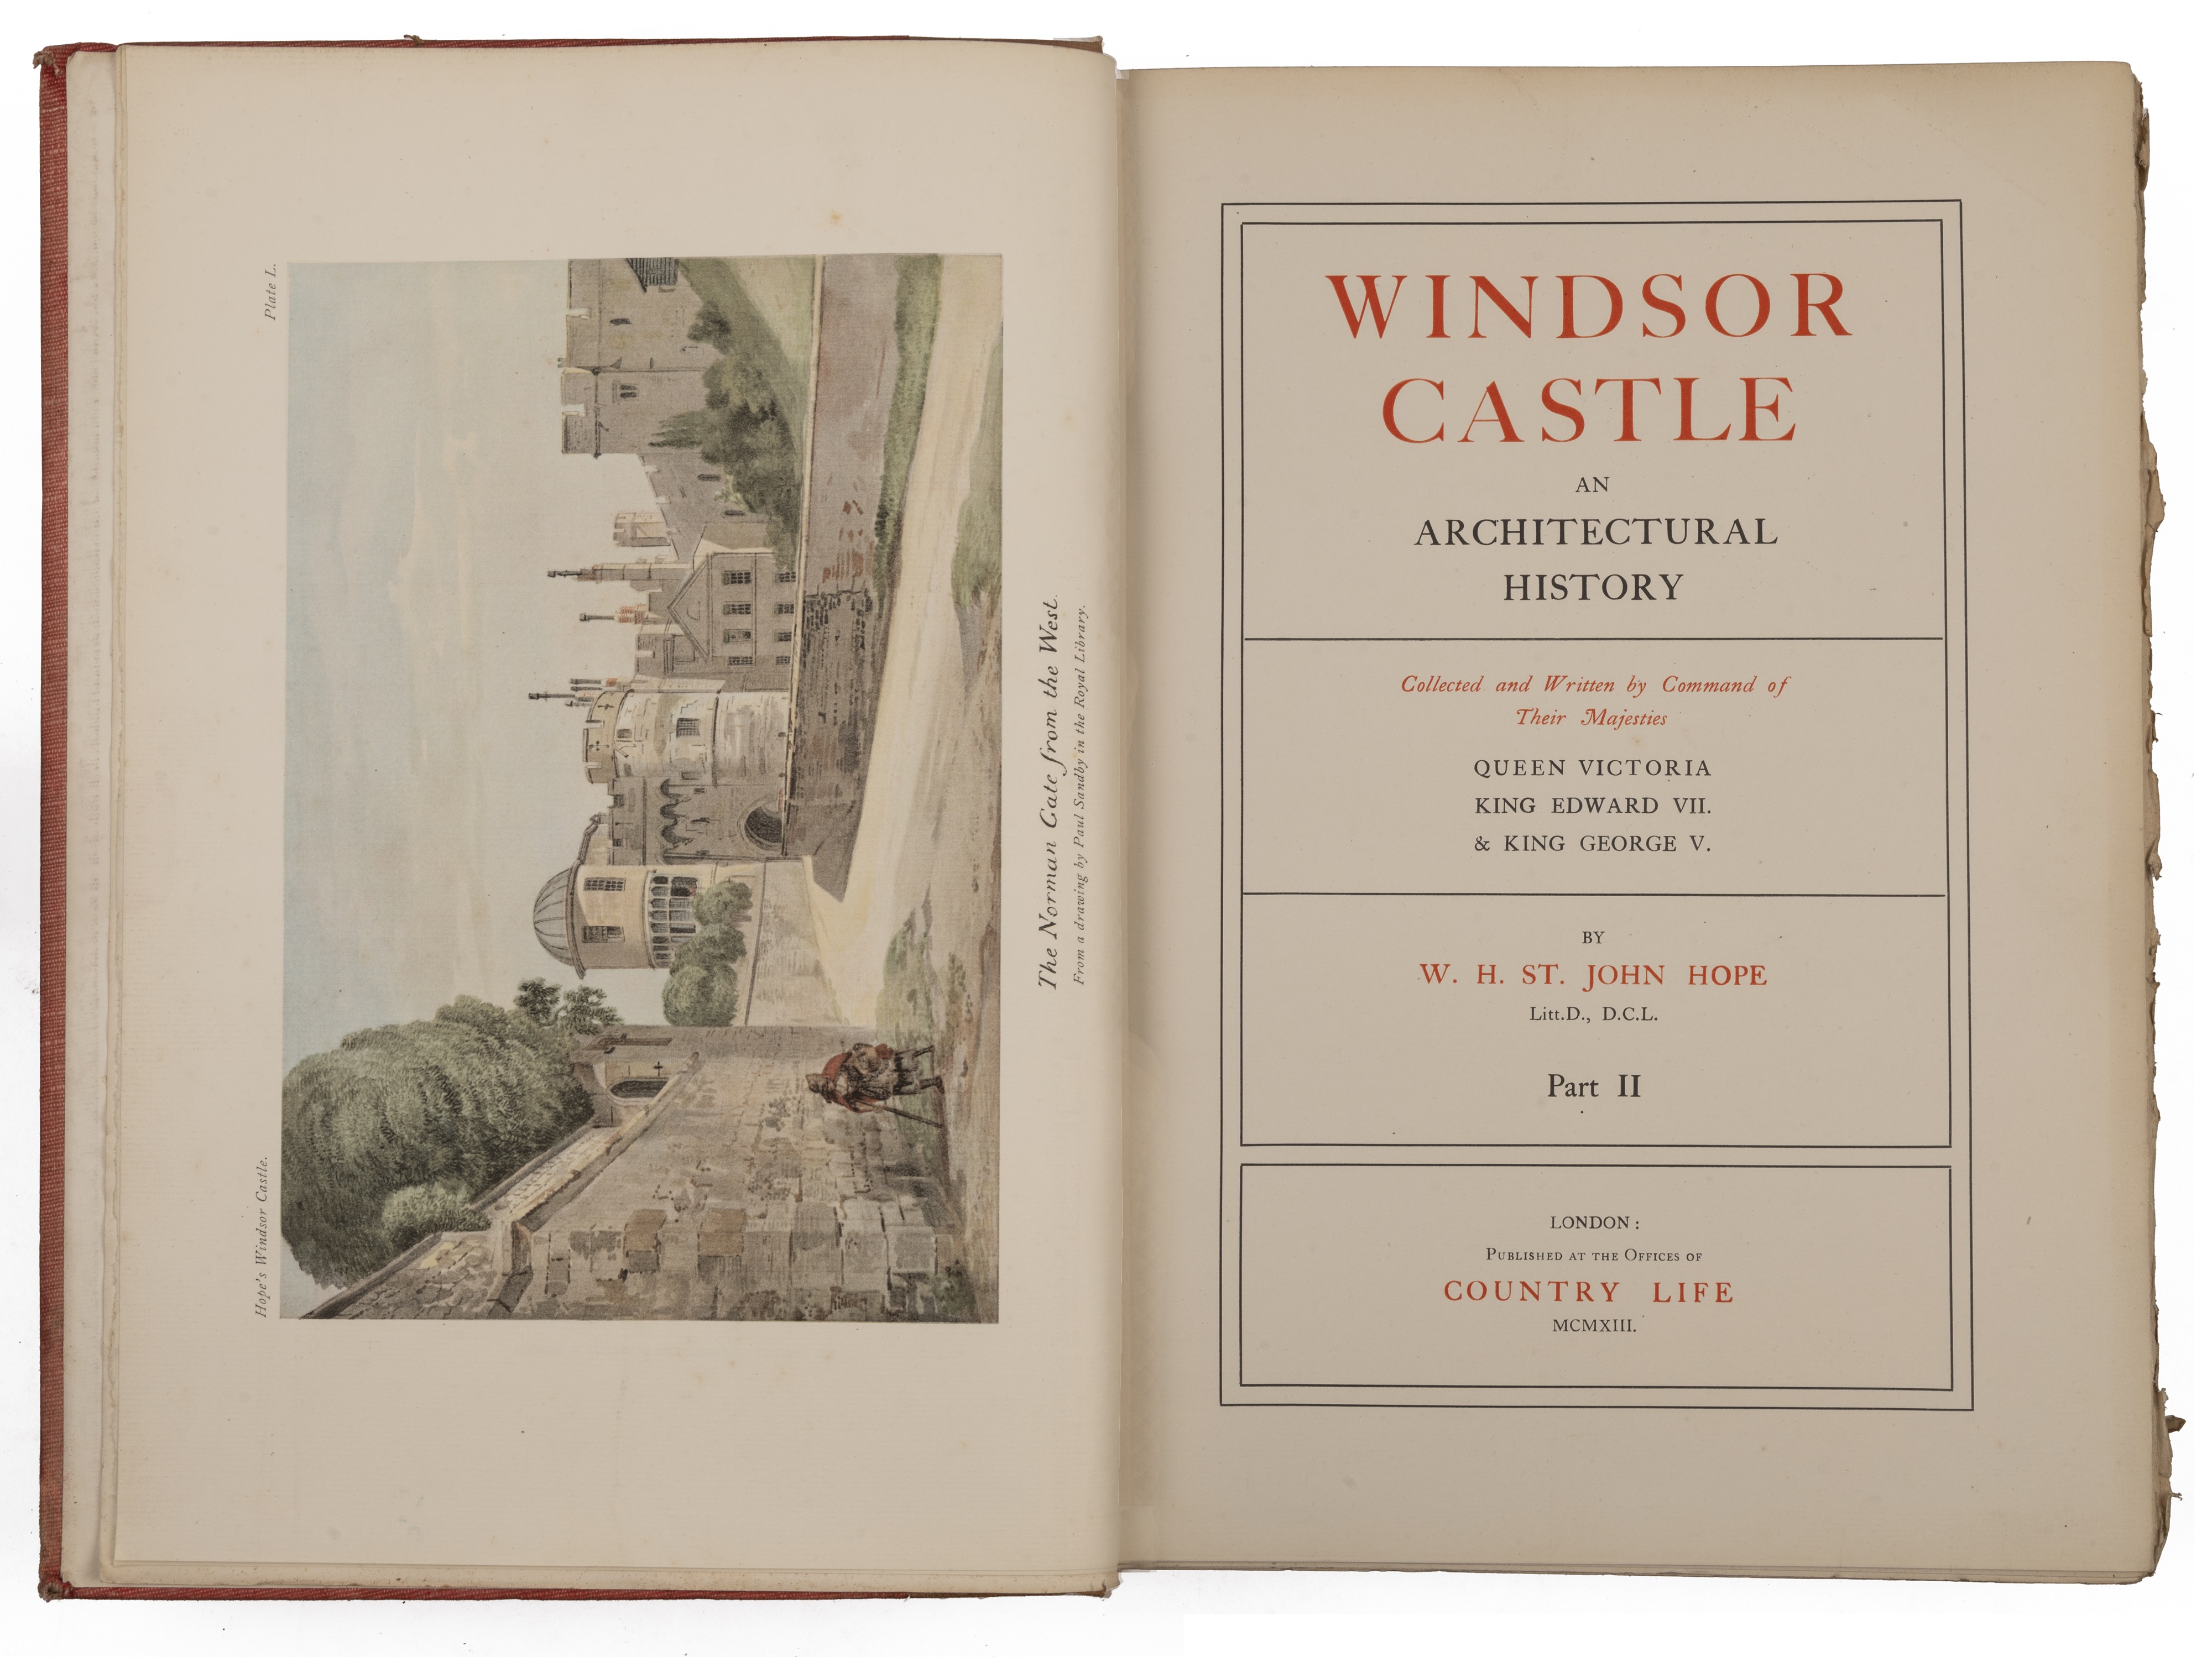 St John Hope (W.H.) 'Windsor Castle, An Architectural History' Country Life, London 1913. 2 vols. - Image 2 of 9